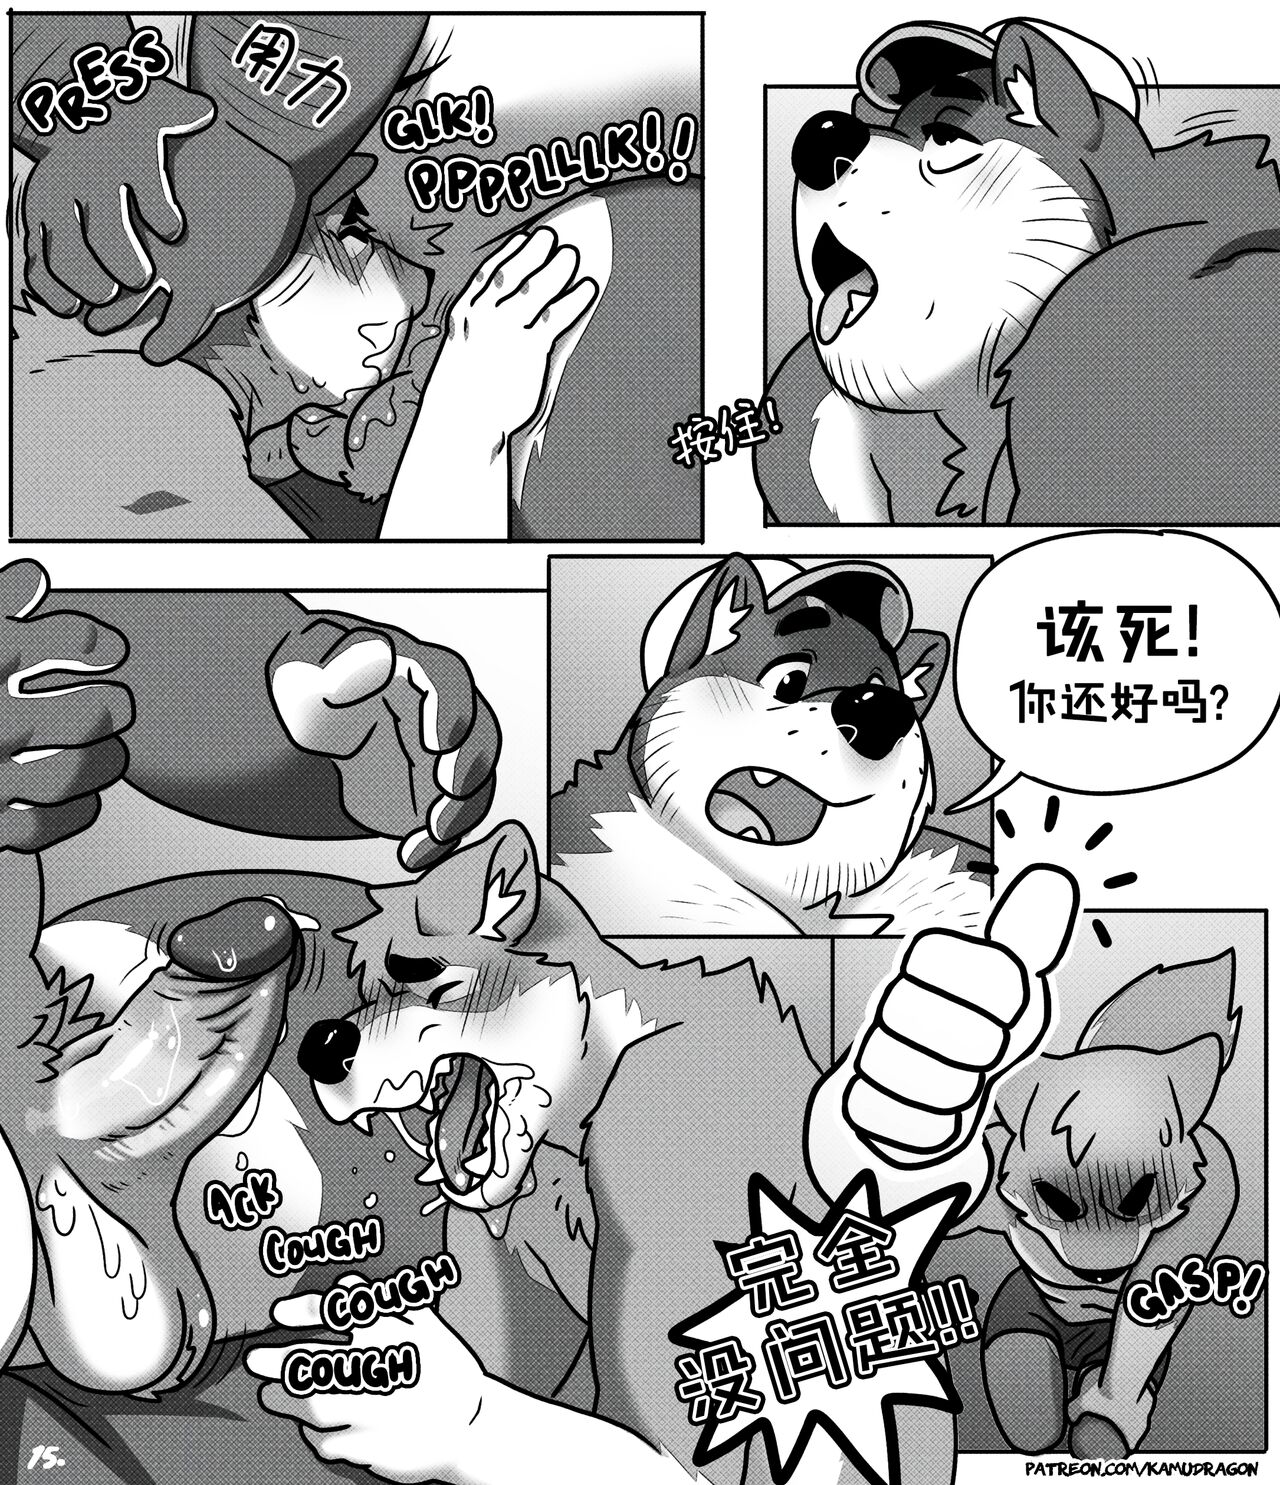 [KamuDragon] ASSISTING BOSSMAN | 我的老板需要帮忙! + 额外插图 [Chinese][Translated by Chrome Heart Tags] 